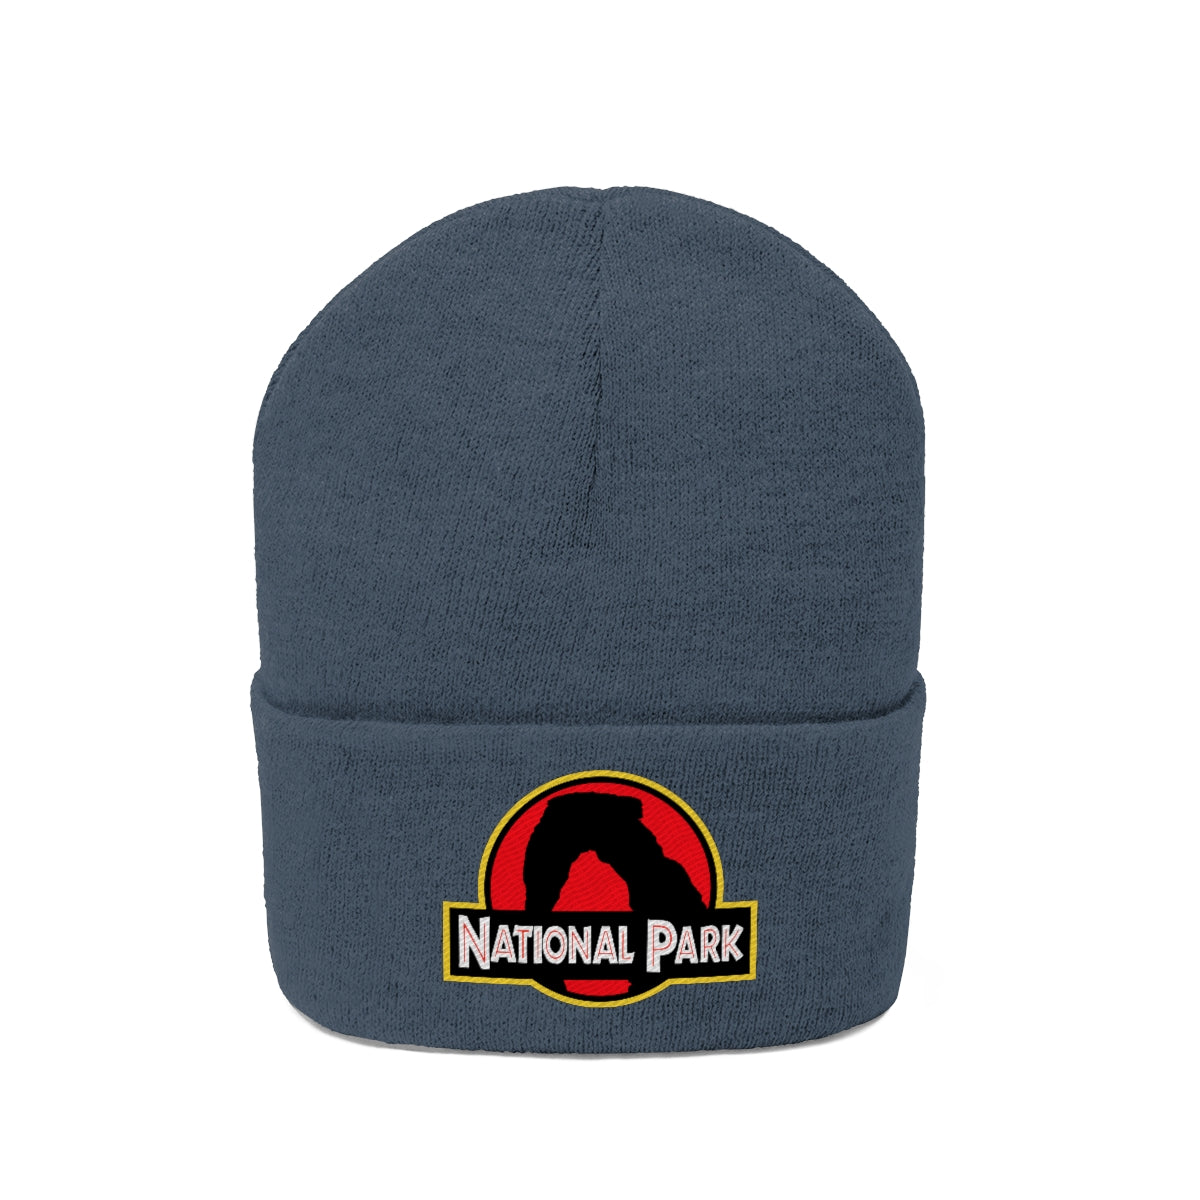 Arches National Park Hat - Delicate Arch Knit Beanie Sewn Parody Logo